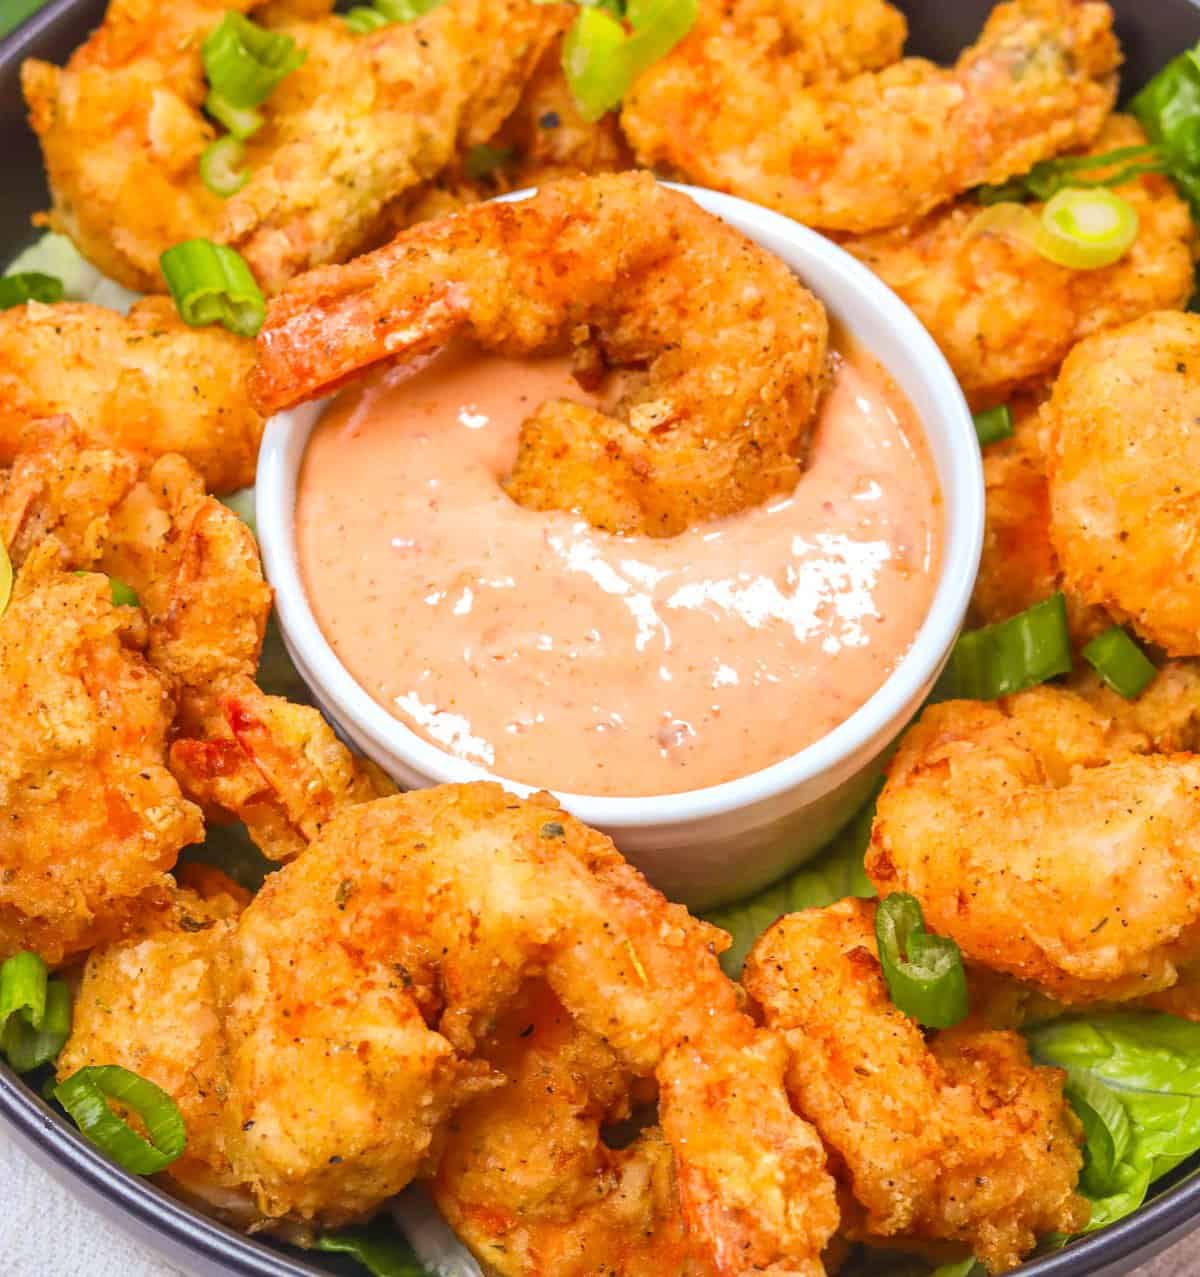 Dipping spicy fried shrimp in delicious Boom Boom sauce